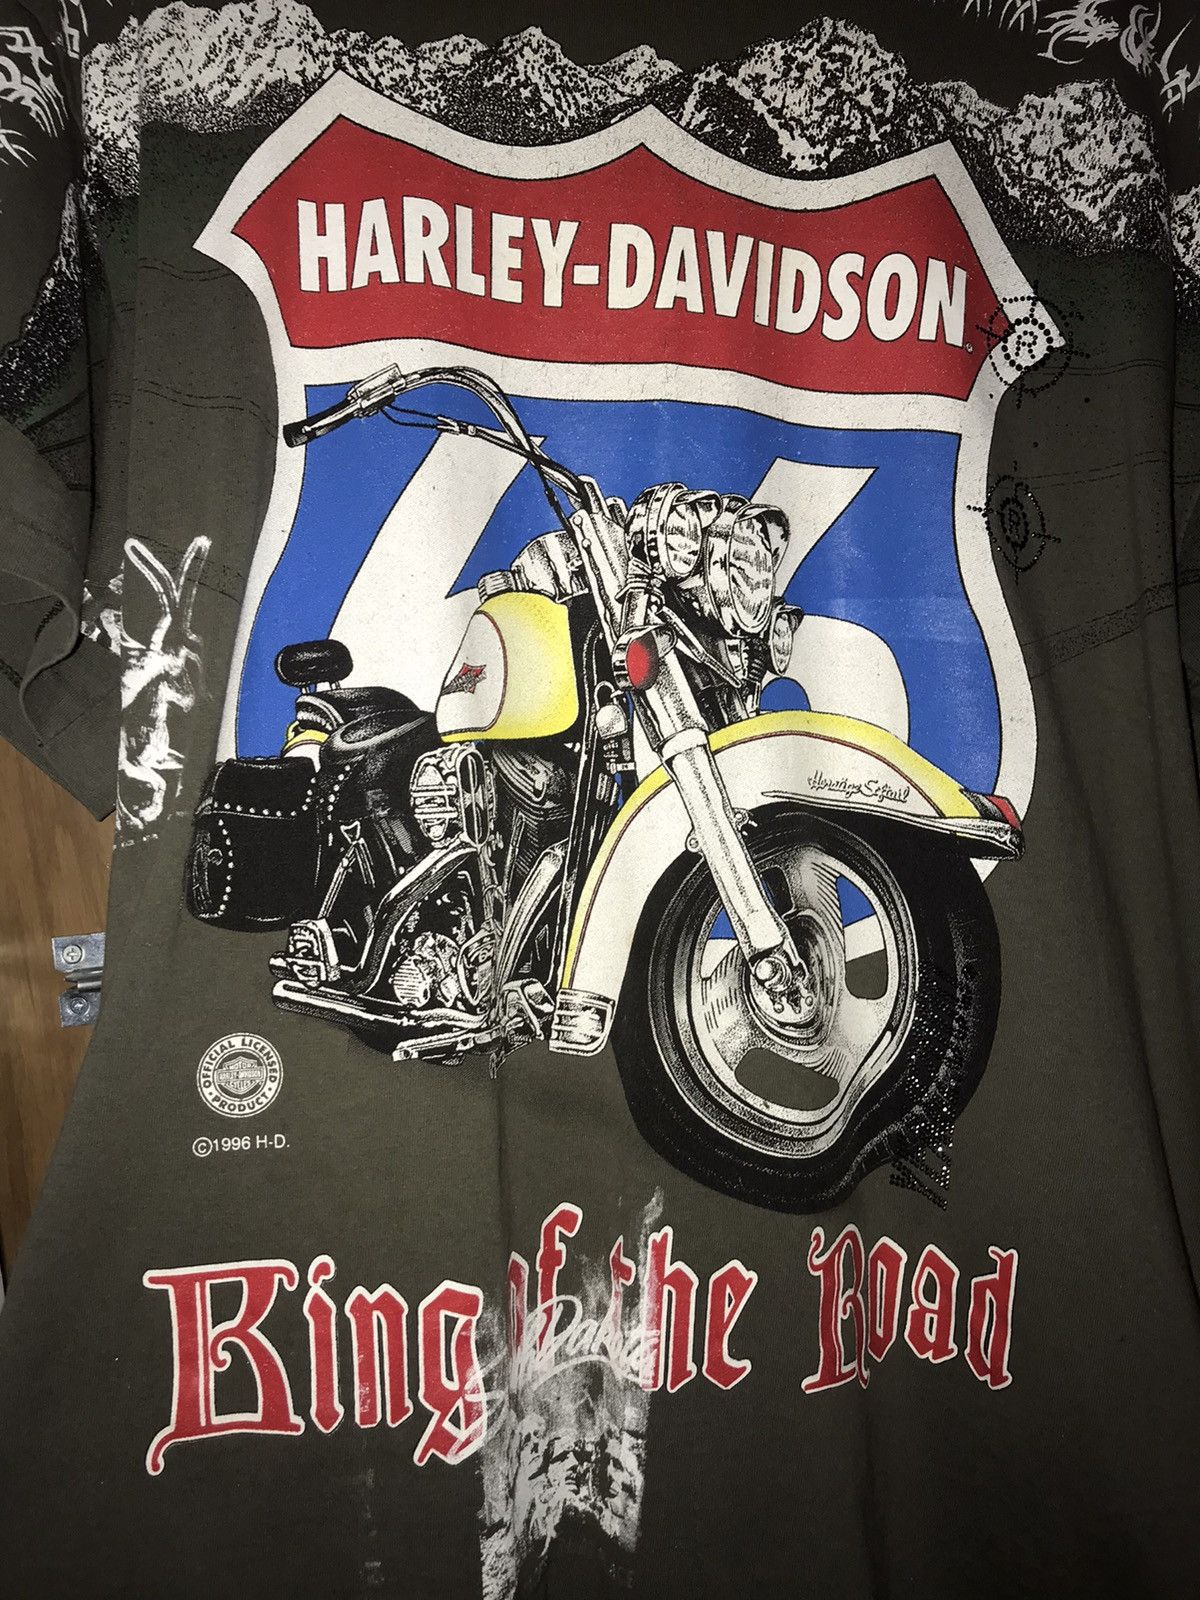 Vintage Harley Davidson X Year 2000 King Of The Road T Shirt Size US XL / EU 56 / 4 - 2 Preview